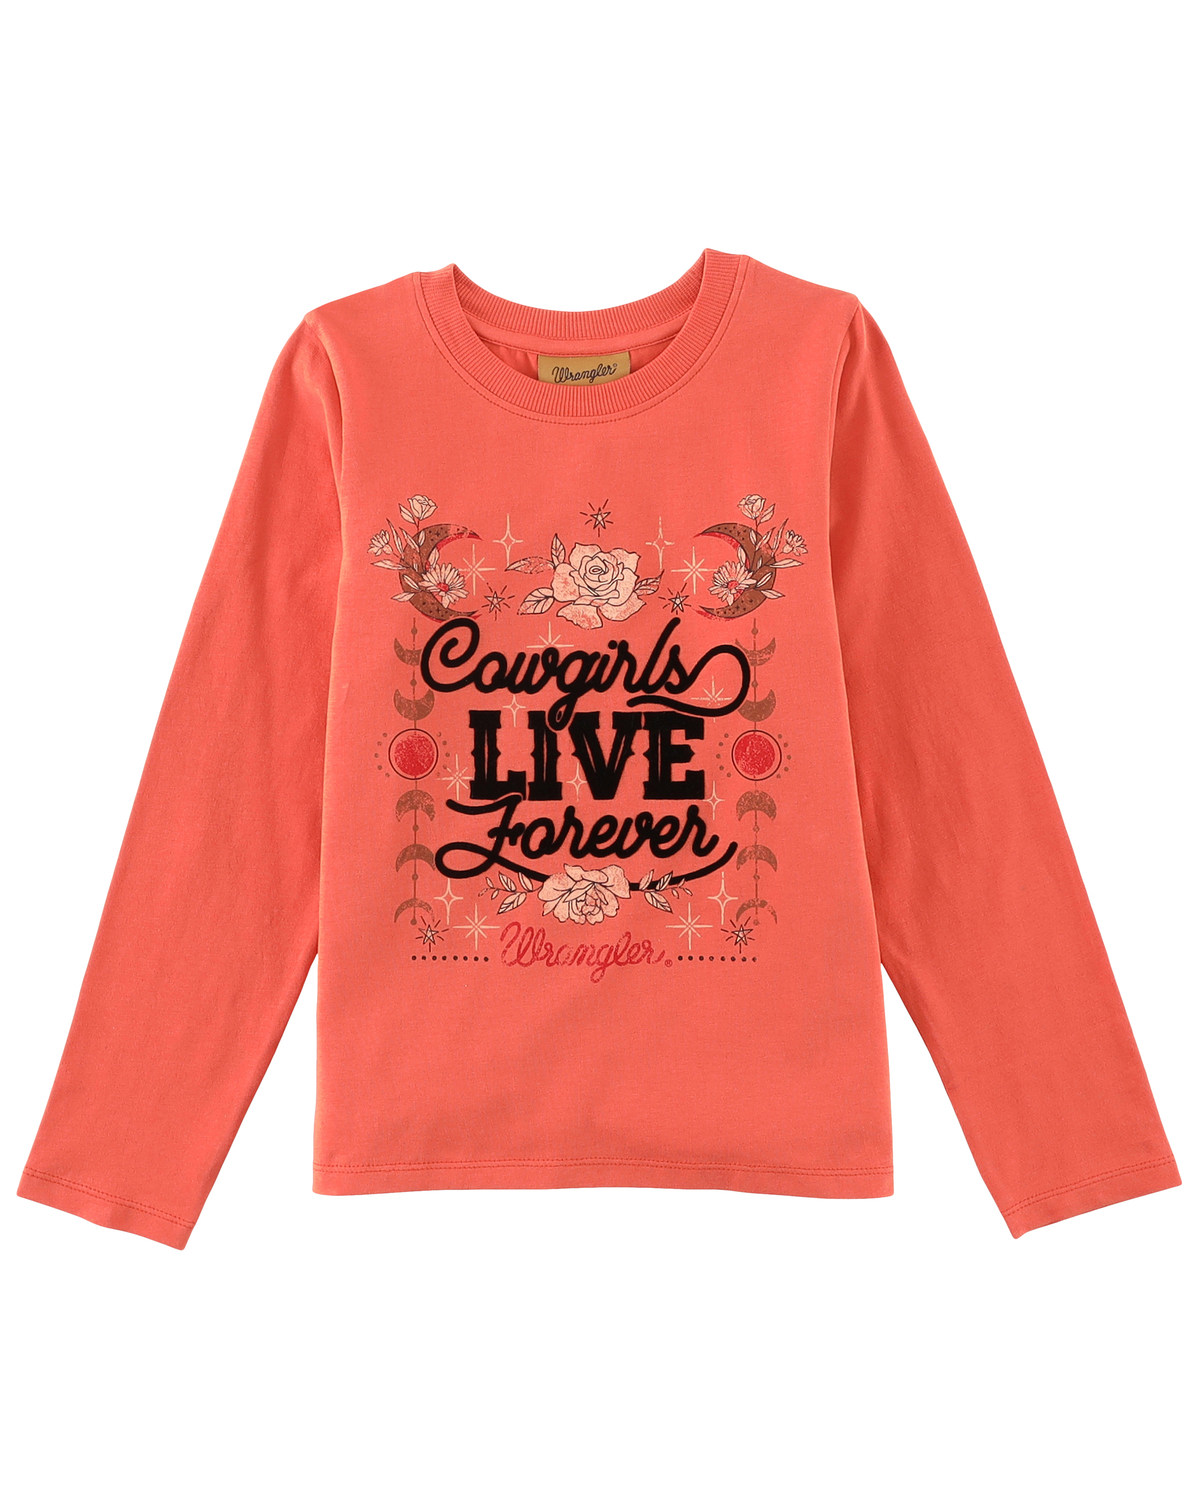 Wrangler Girls' Cowgirls Live Forever Long Sleeve Graphic Tee